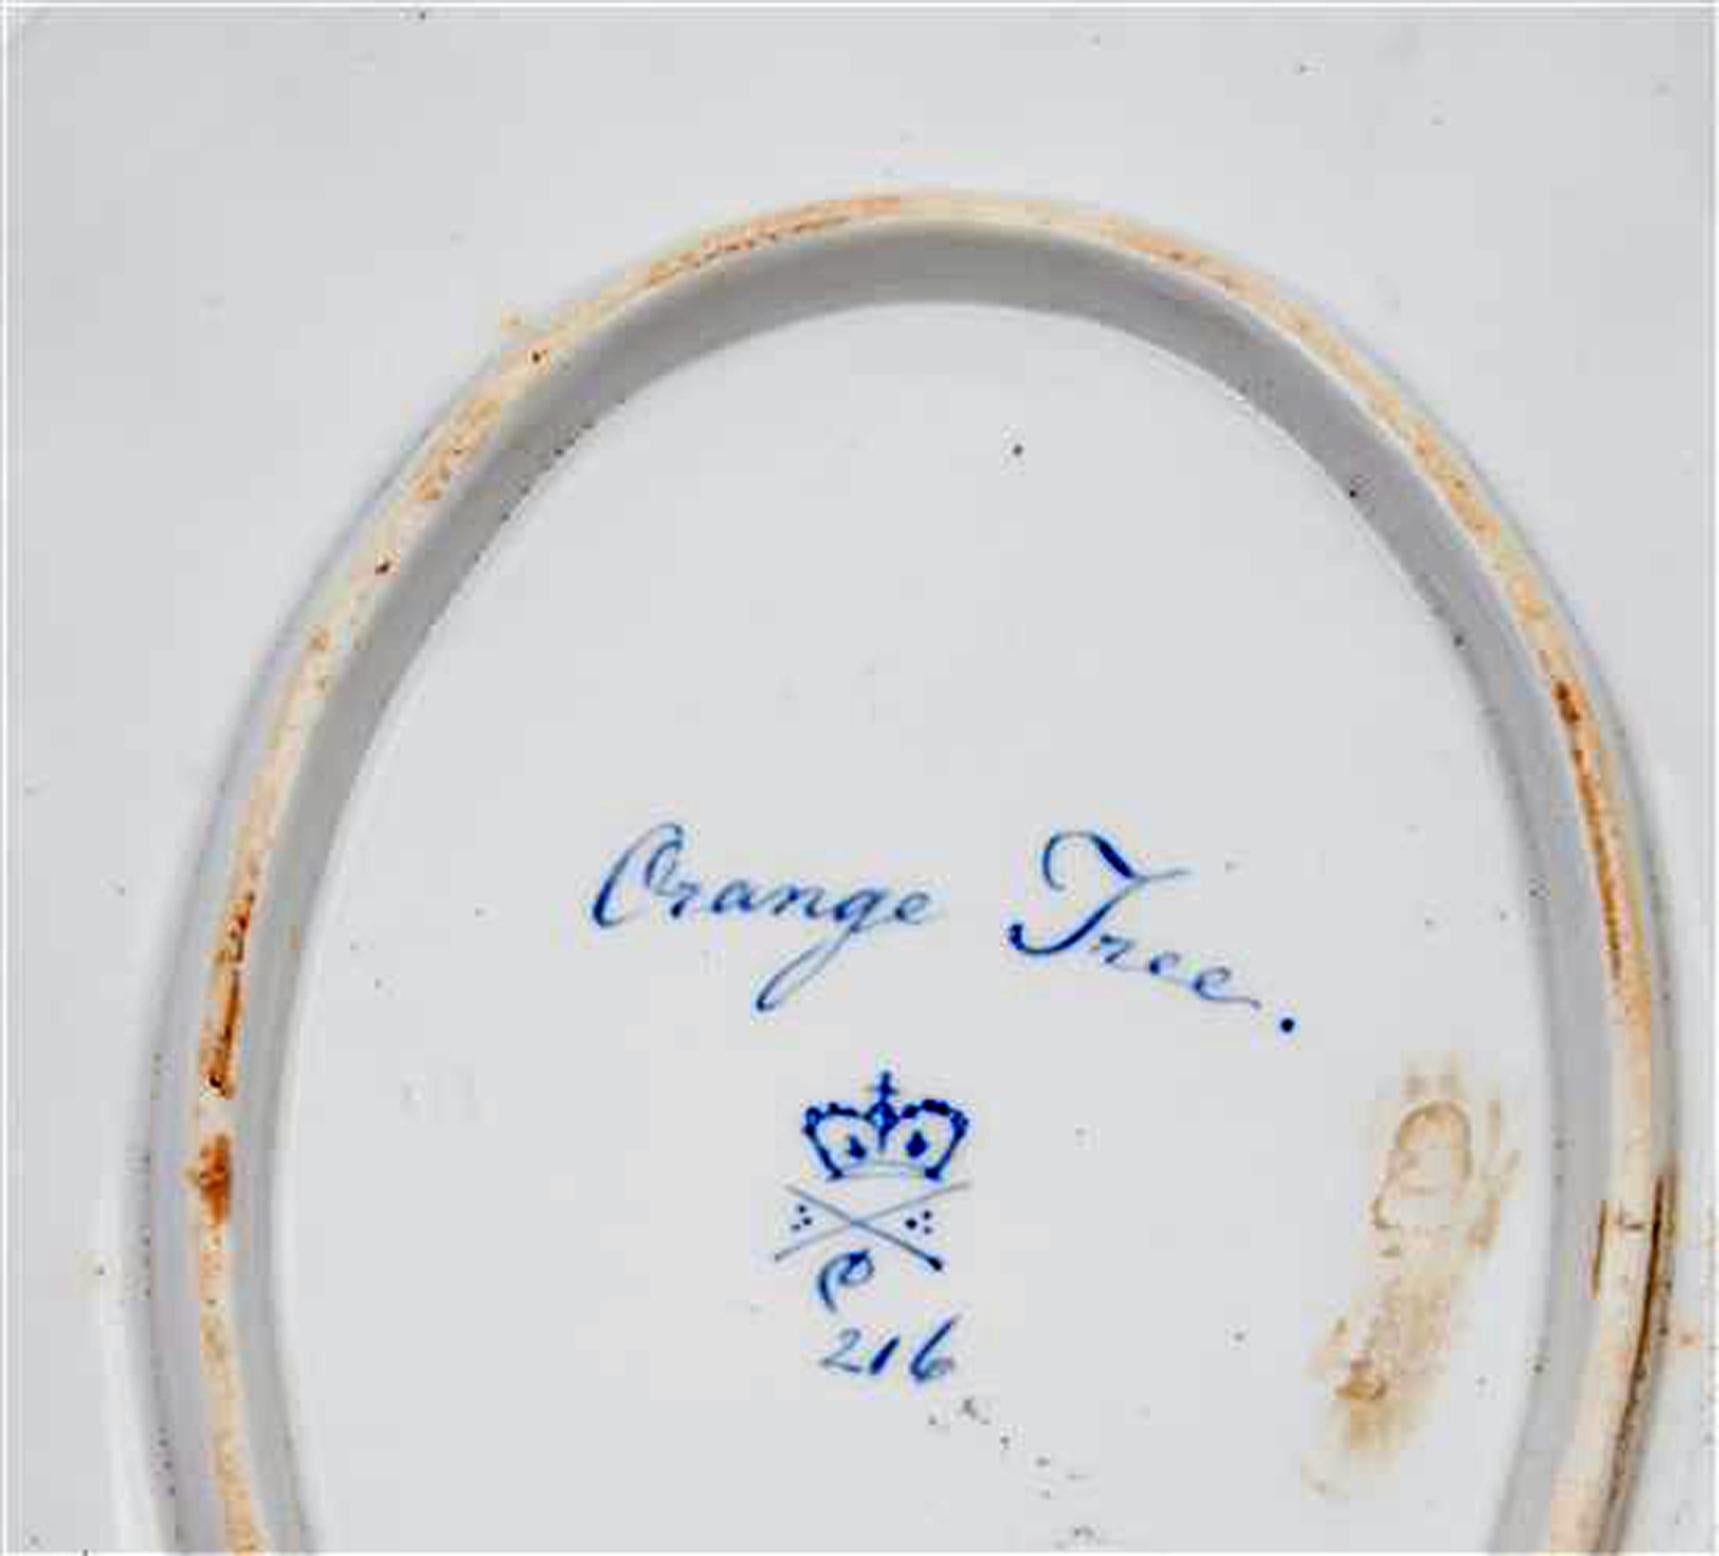 Derby Porcelain Yellow-ground Botanical Dish, 
Pattern #216,
circa 1795

The Derby Porcelain oval dish has a yellow-ground border with a central well painted with an orange tree and leaves within a gilt border

Named on the reverse in blue